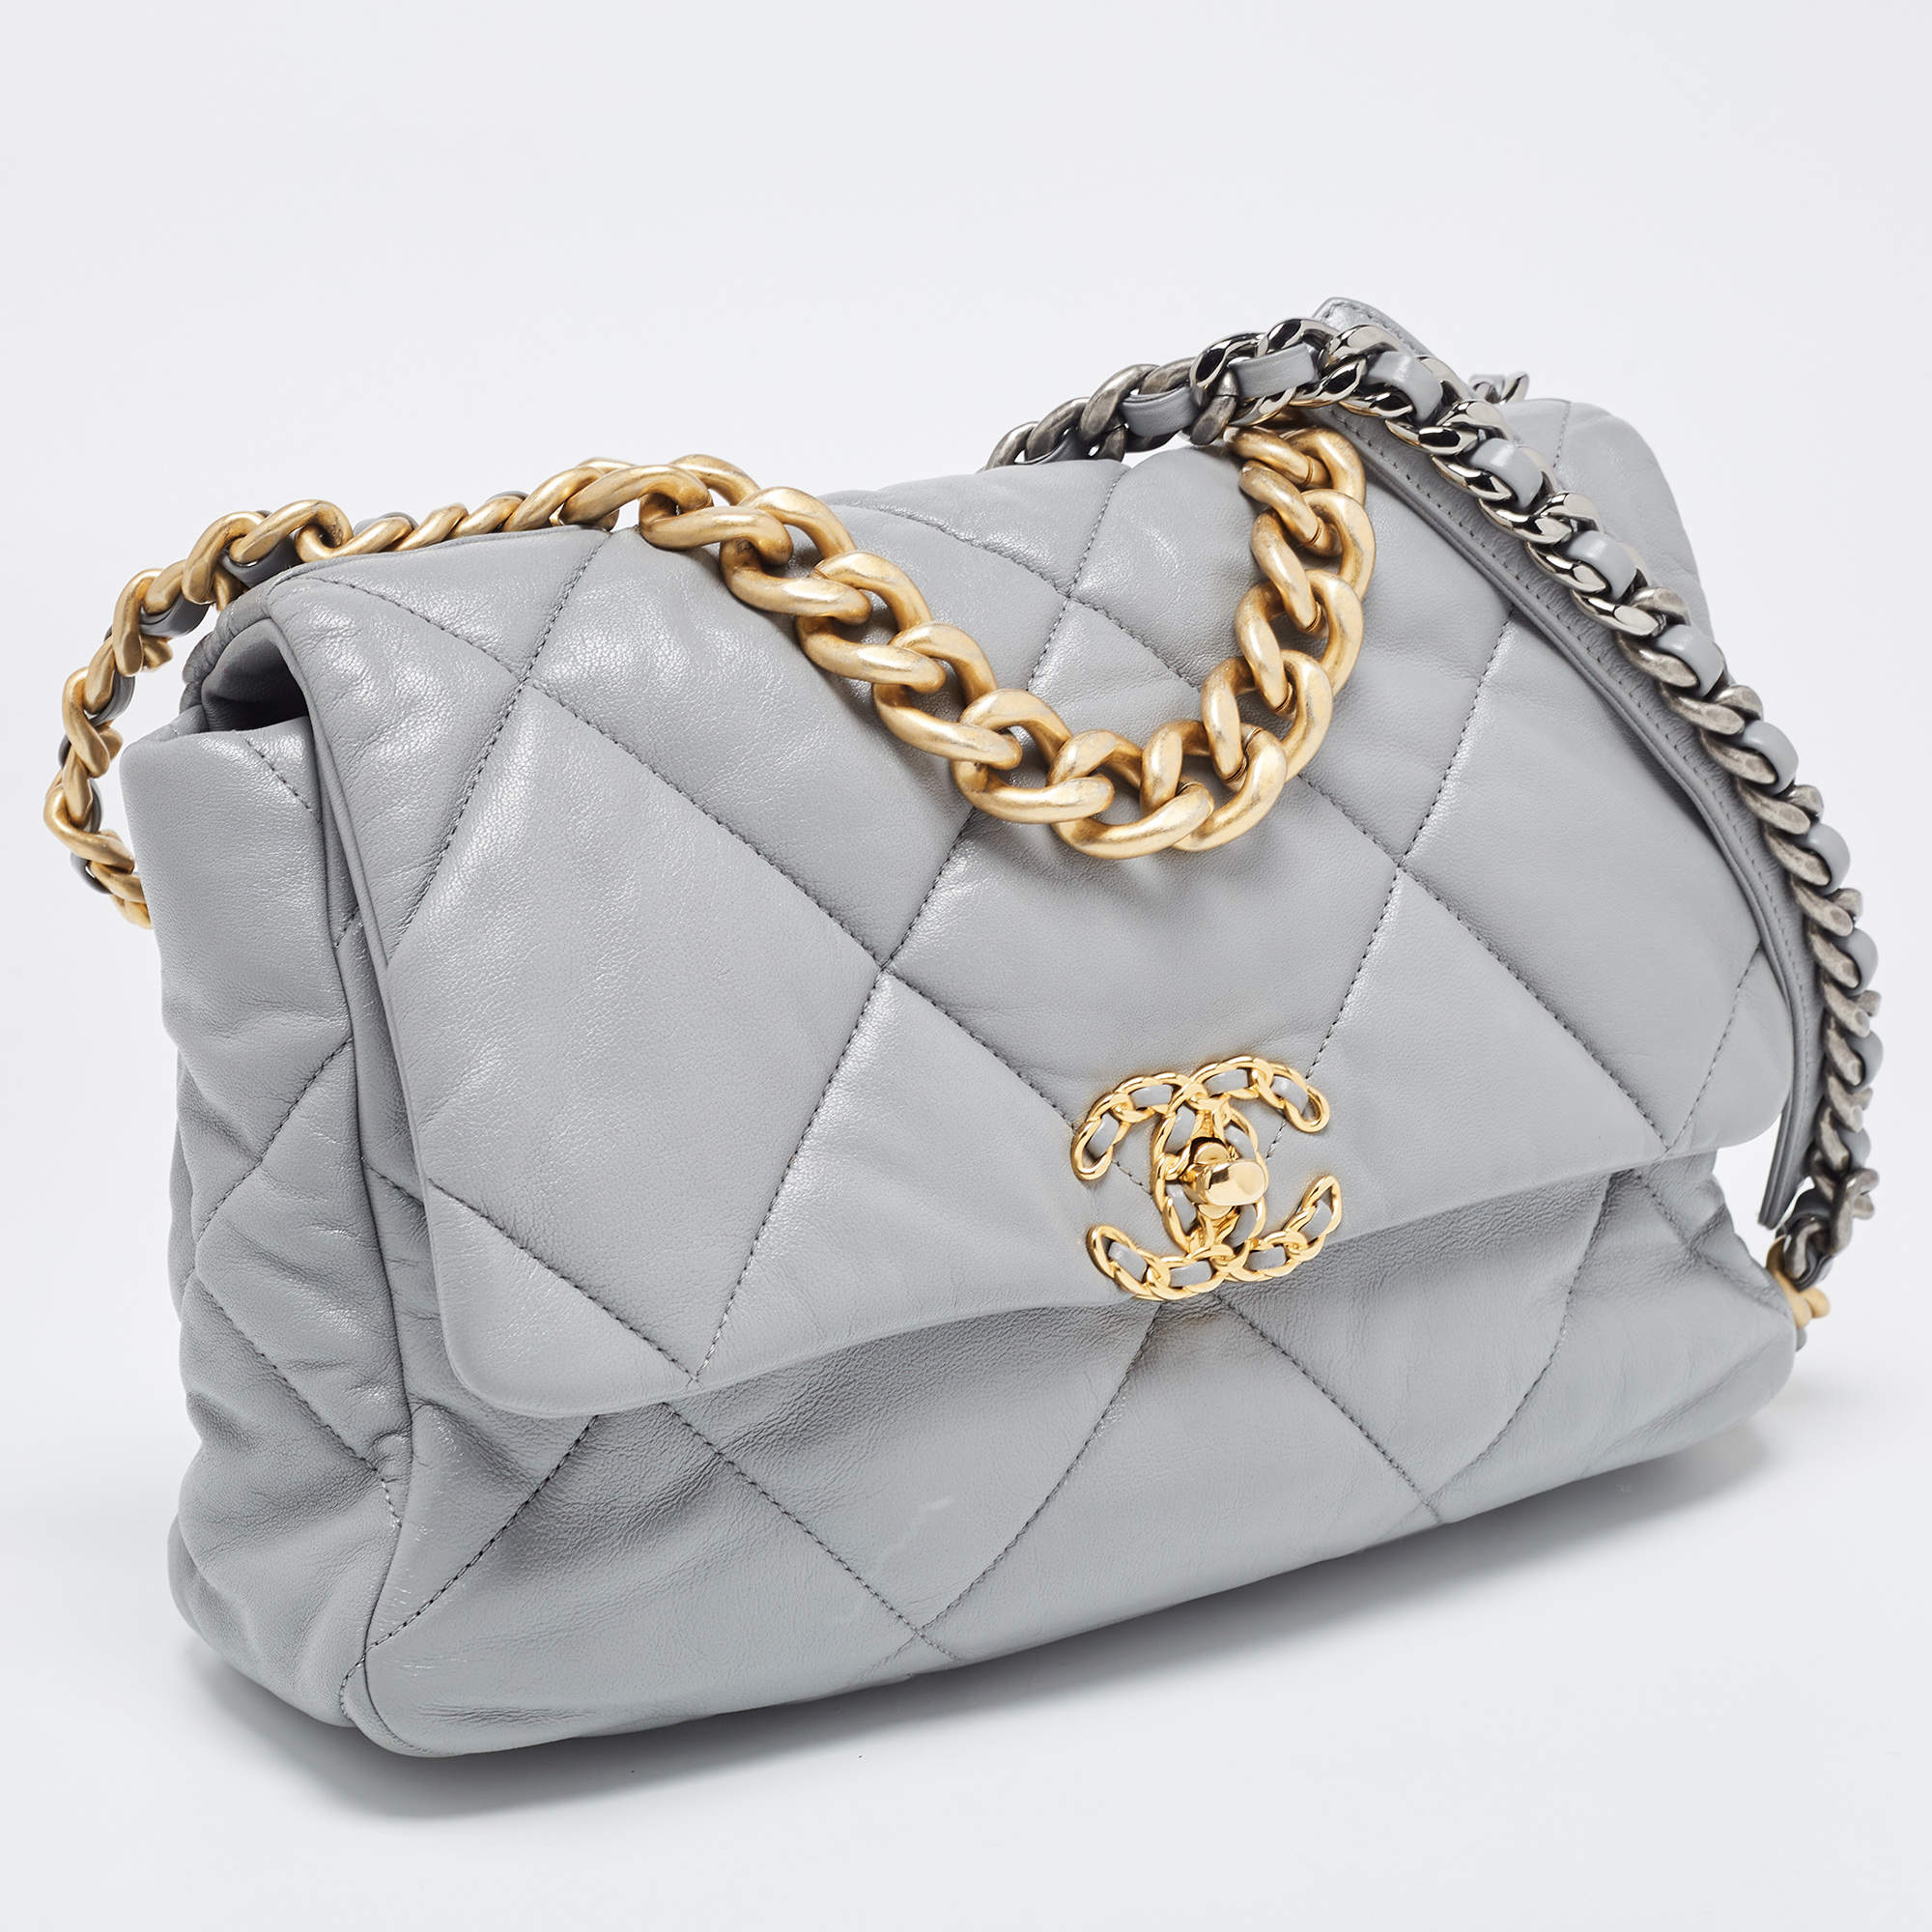 Chanel Grey Quilted Leather Large 19 Flap Bag Chanel